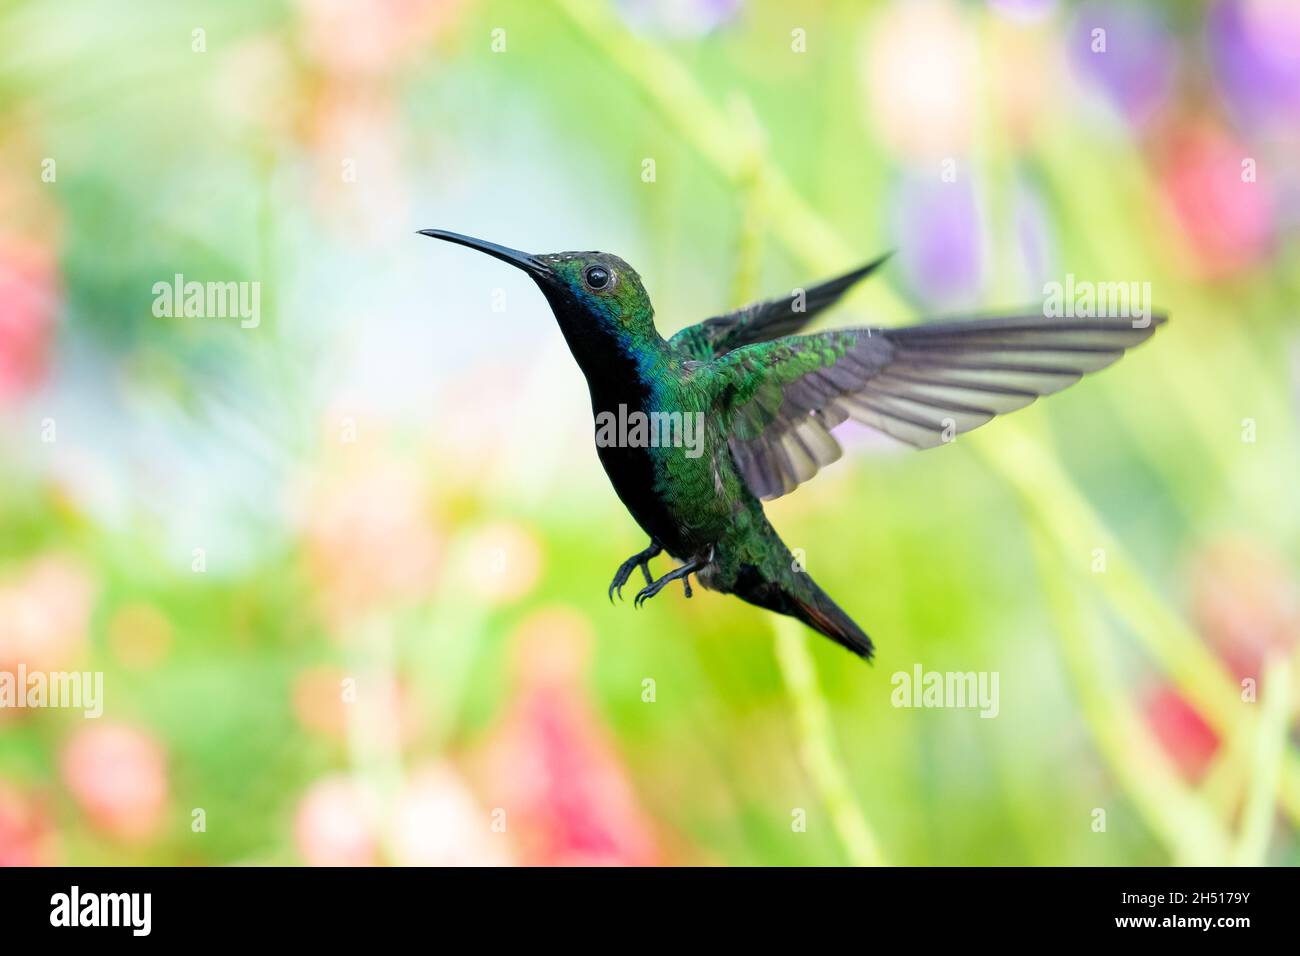 A male Black-throated Mango hummingbird hovering with a colorful blurred floral background. Stock Photo